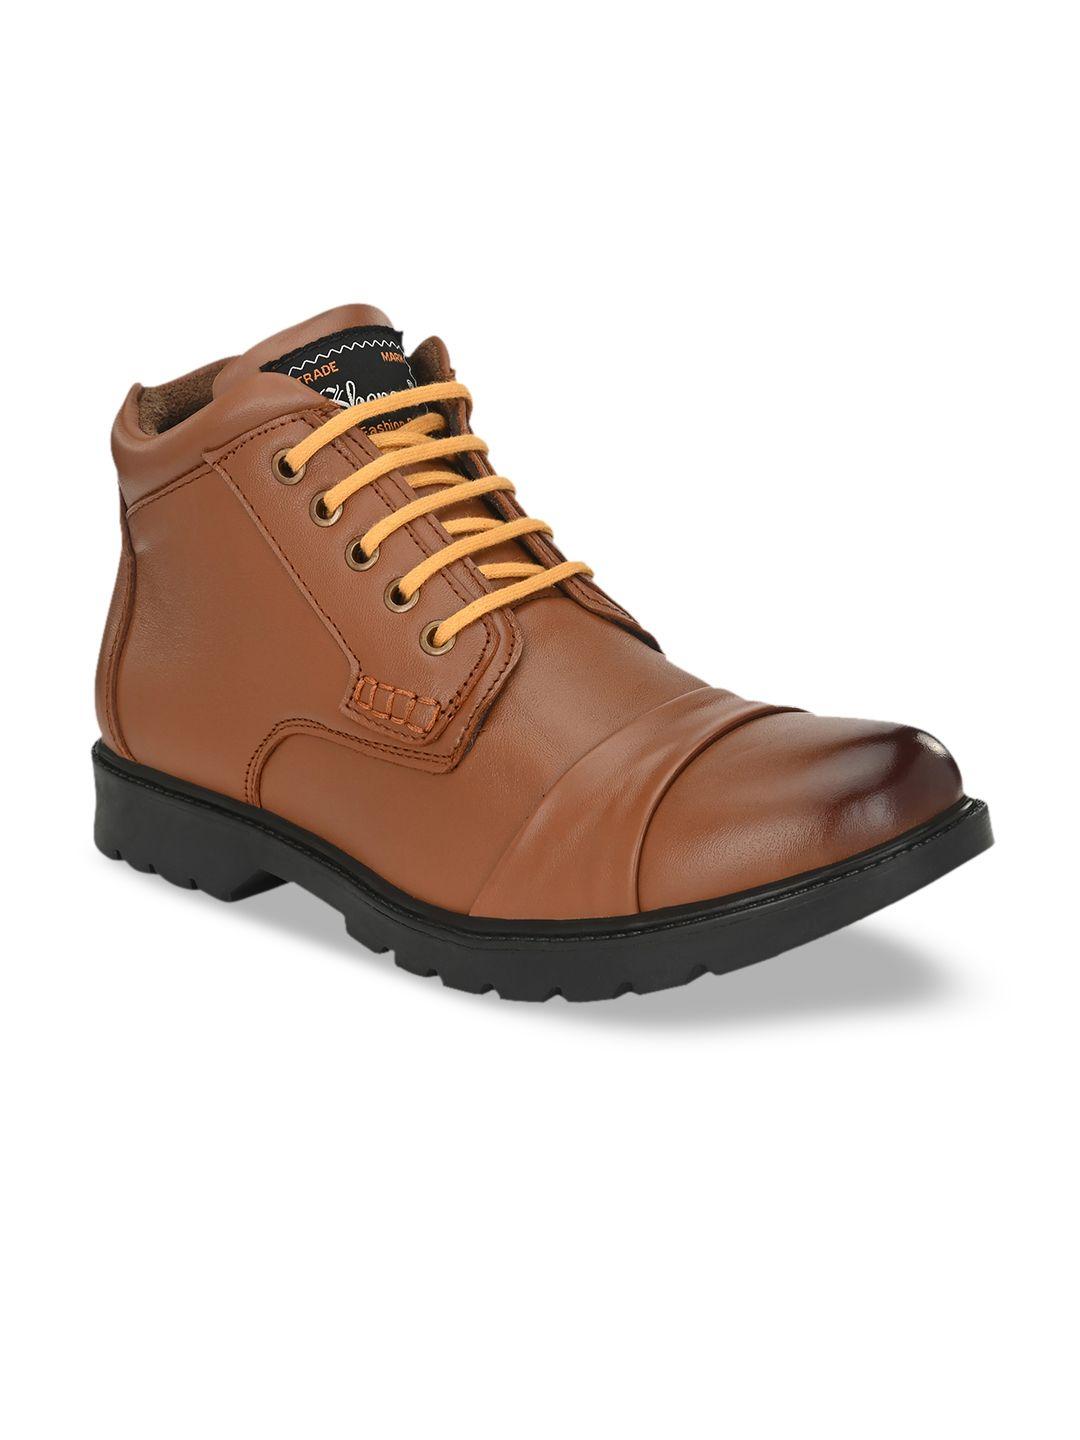 shences men brown solid genuine leather mid-top flat boots